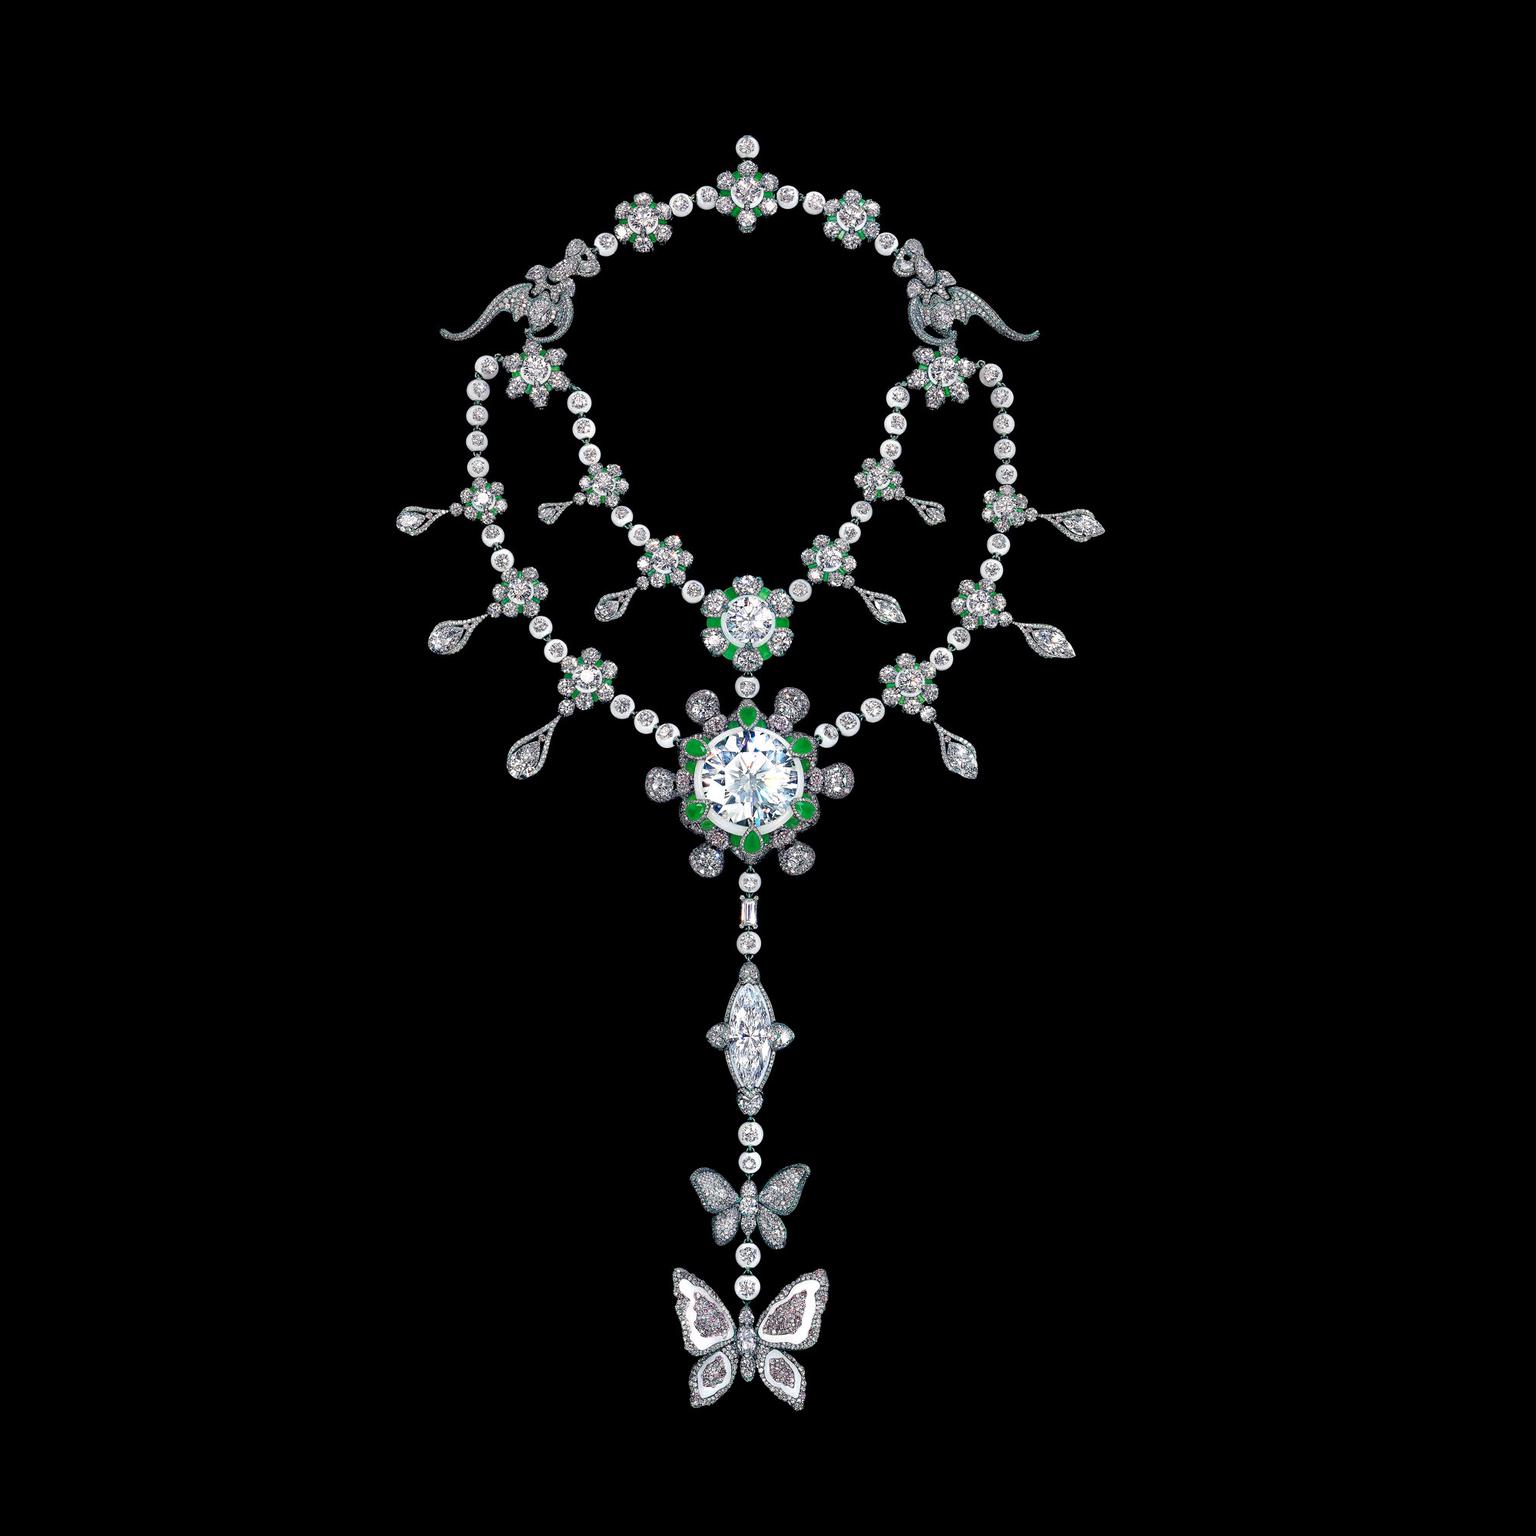 Graff's New High Jewelry Collection Is Celestial Inspired | National Jeweler